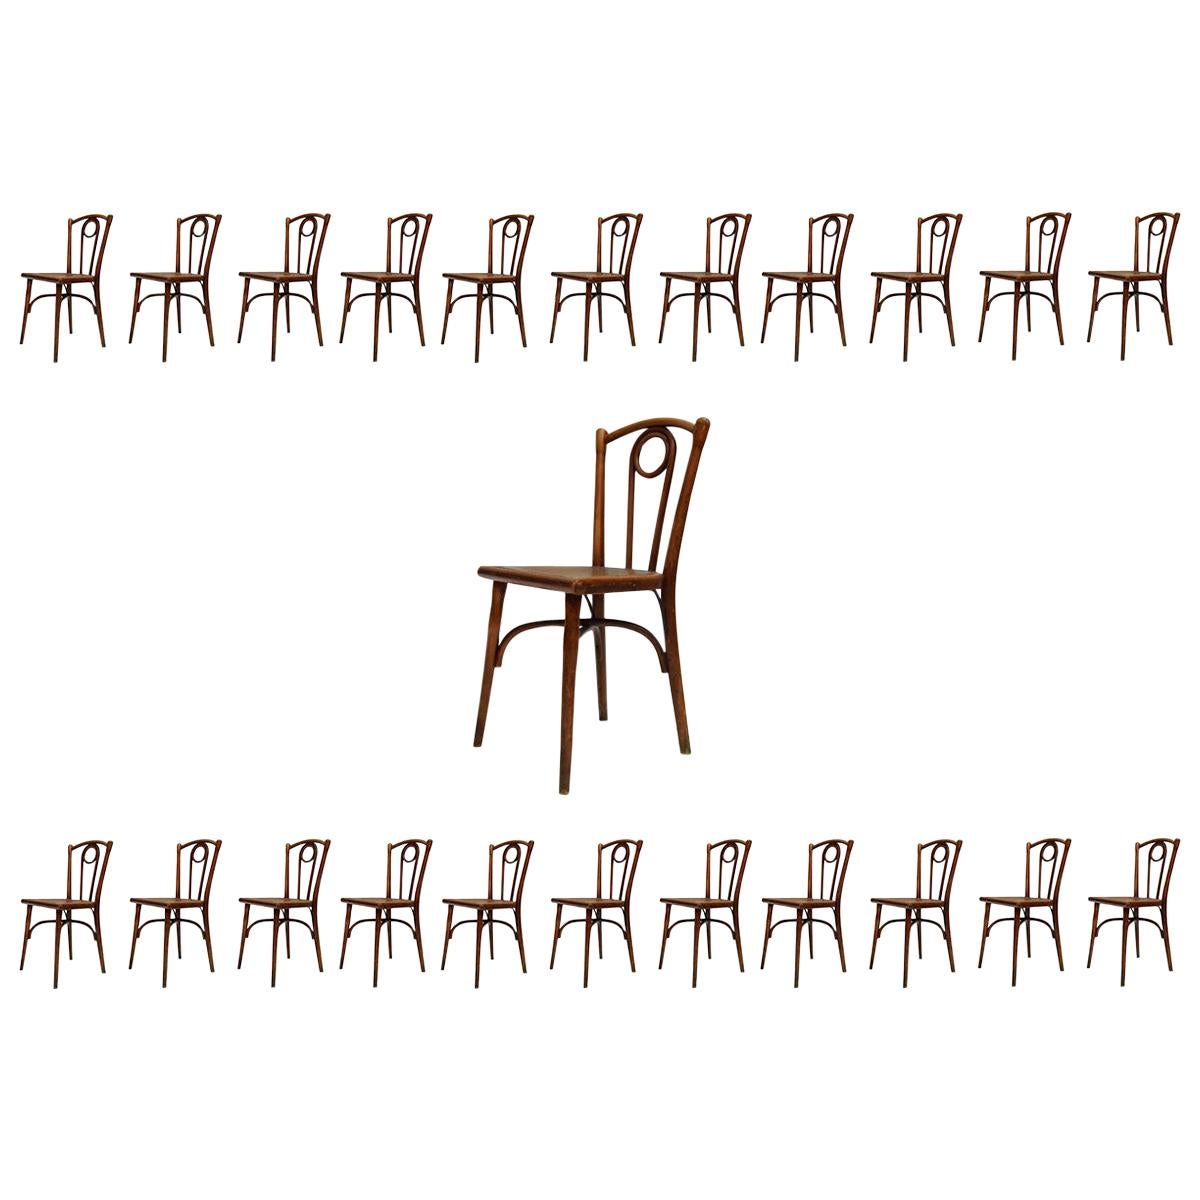 Large Set of 22 Bistro Dining Chairs by Thonet Vienna, before 1921 For Sale